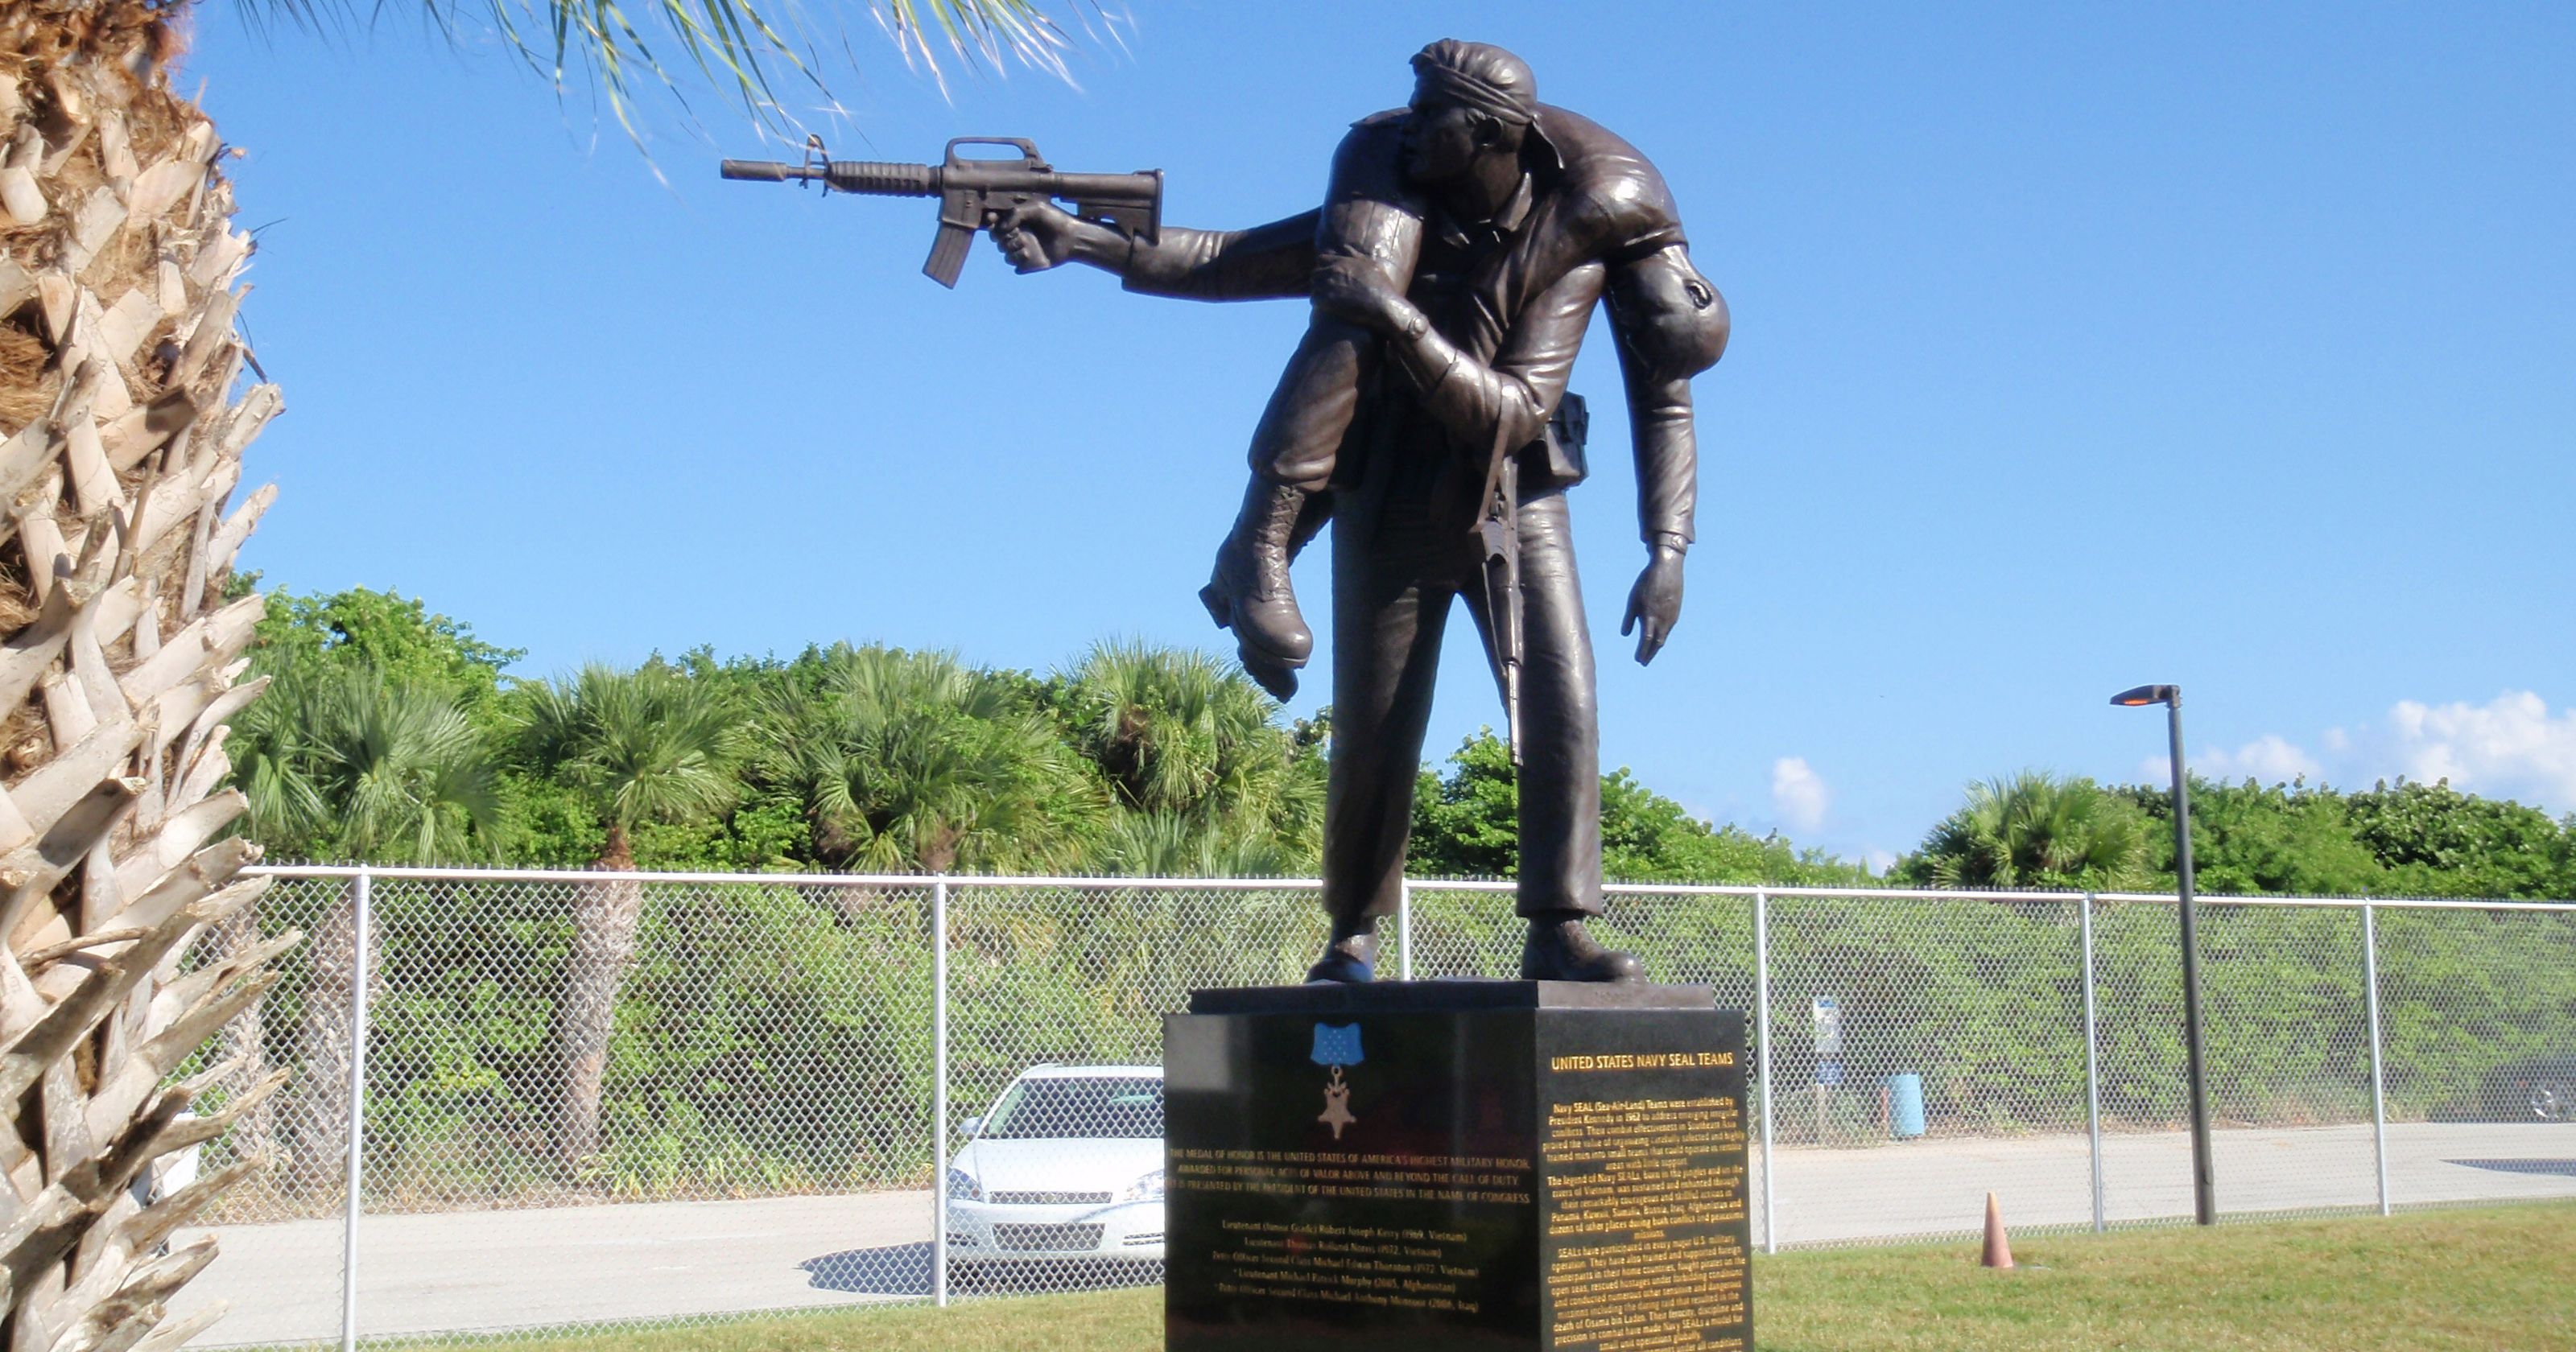 Statue to honor SEAL for Vietnam War rescue